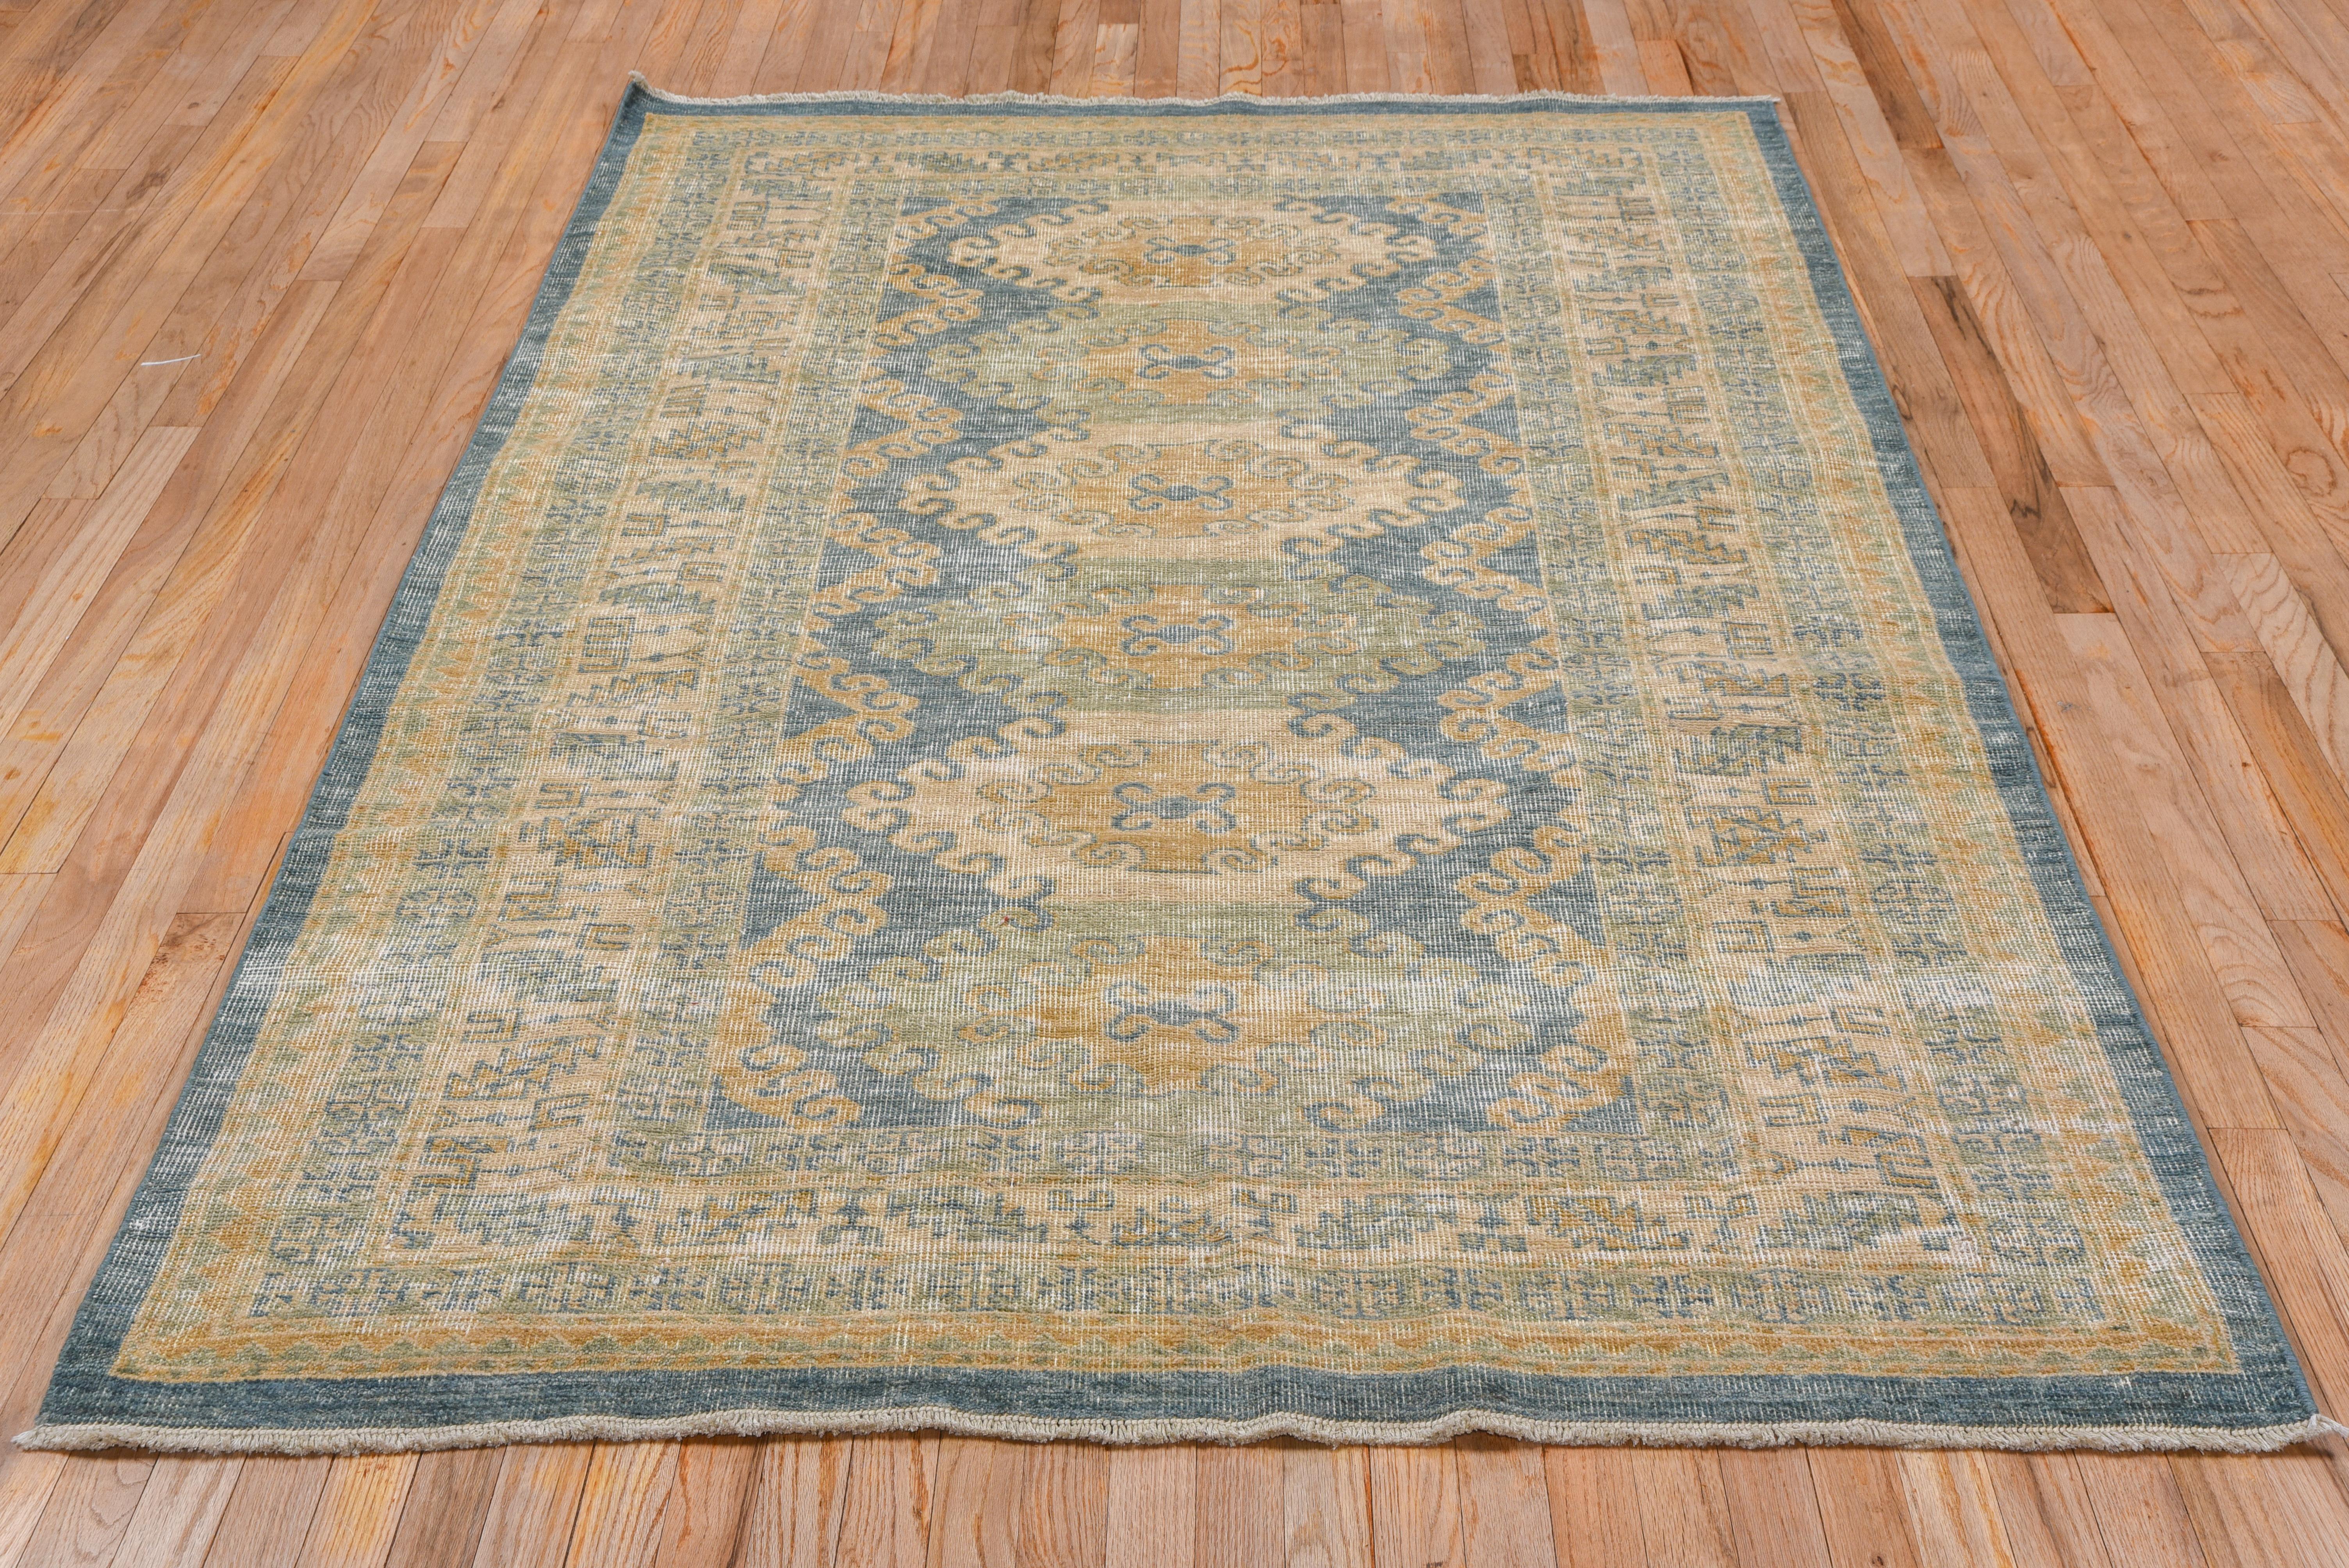 This Oushak rug has six flattened, hooked hexagons decorate the soft blue field of this rustic Anatolian scatter with cream, salmon and dull goldenrod accents, within a Classic calyx and slated, serrated leaf border.
 